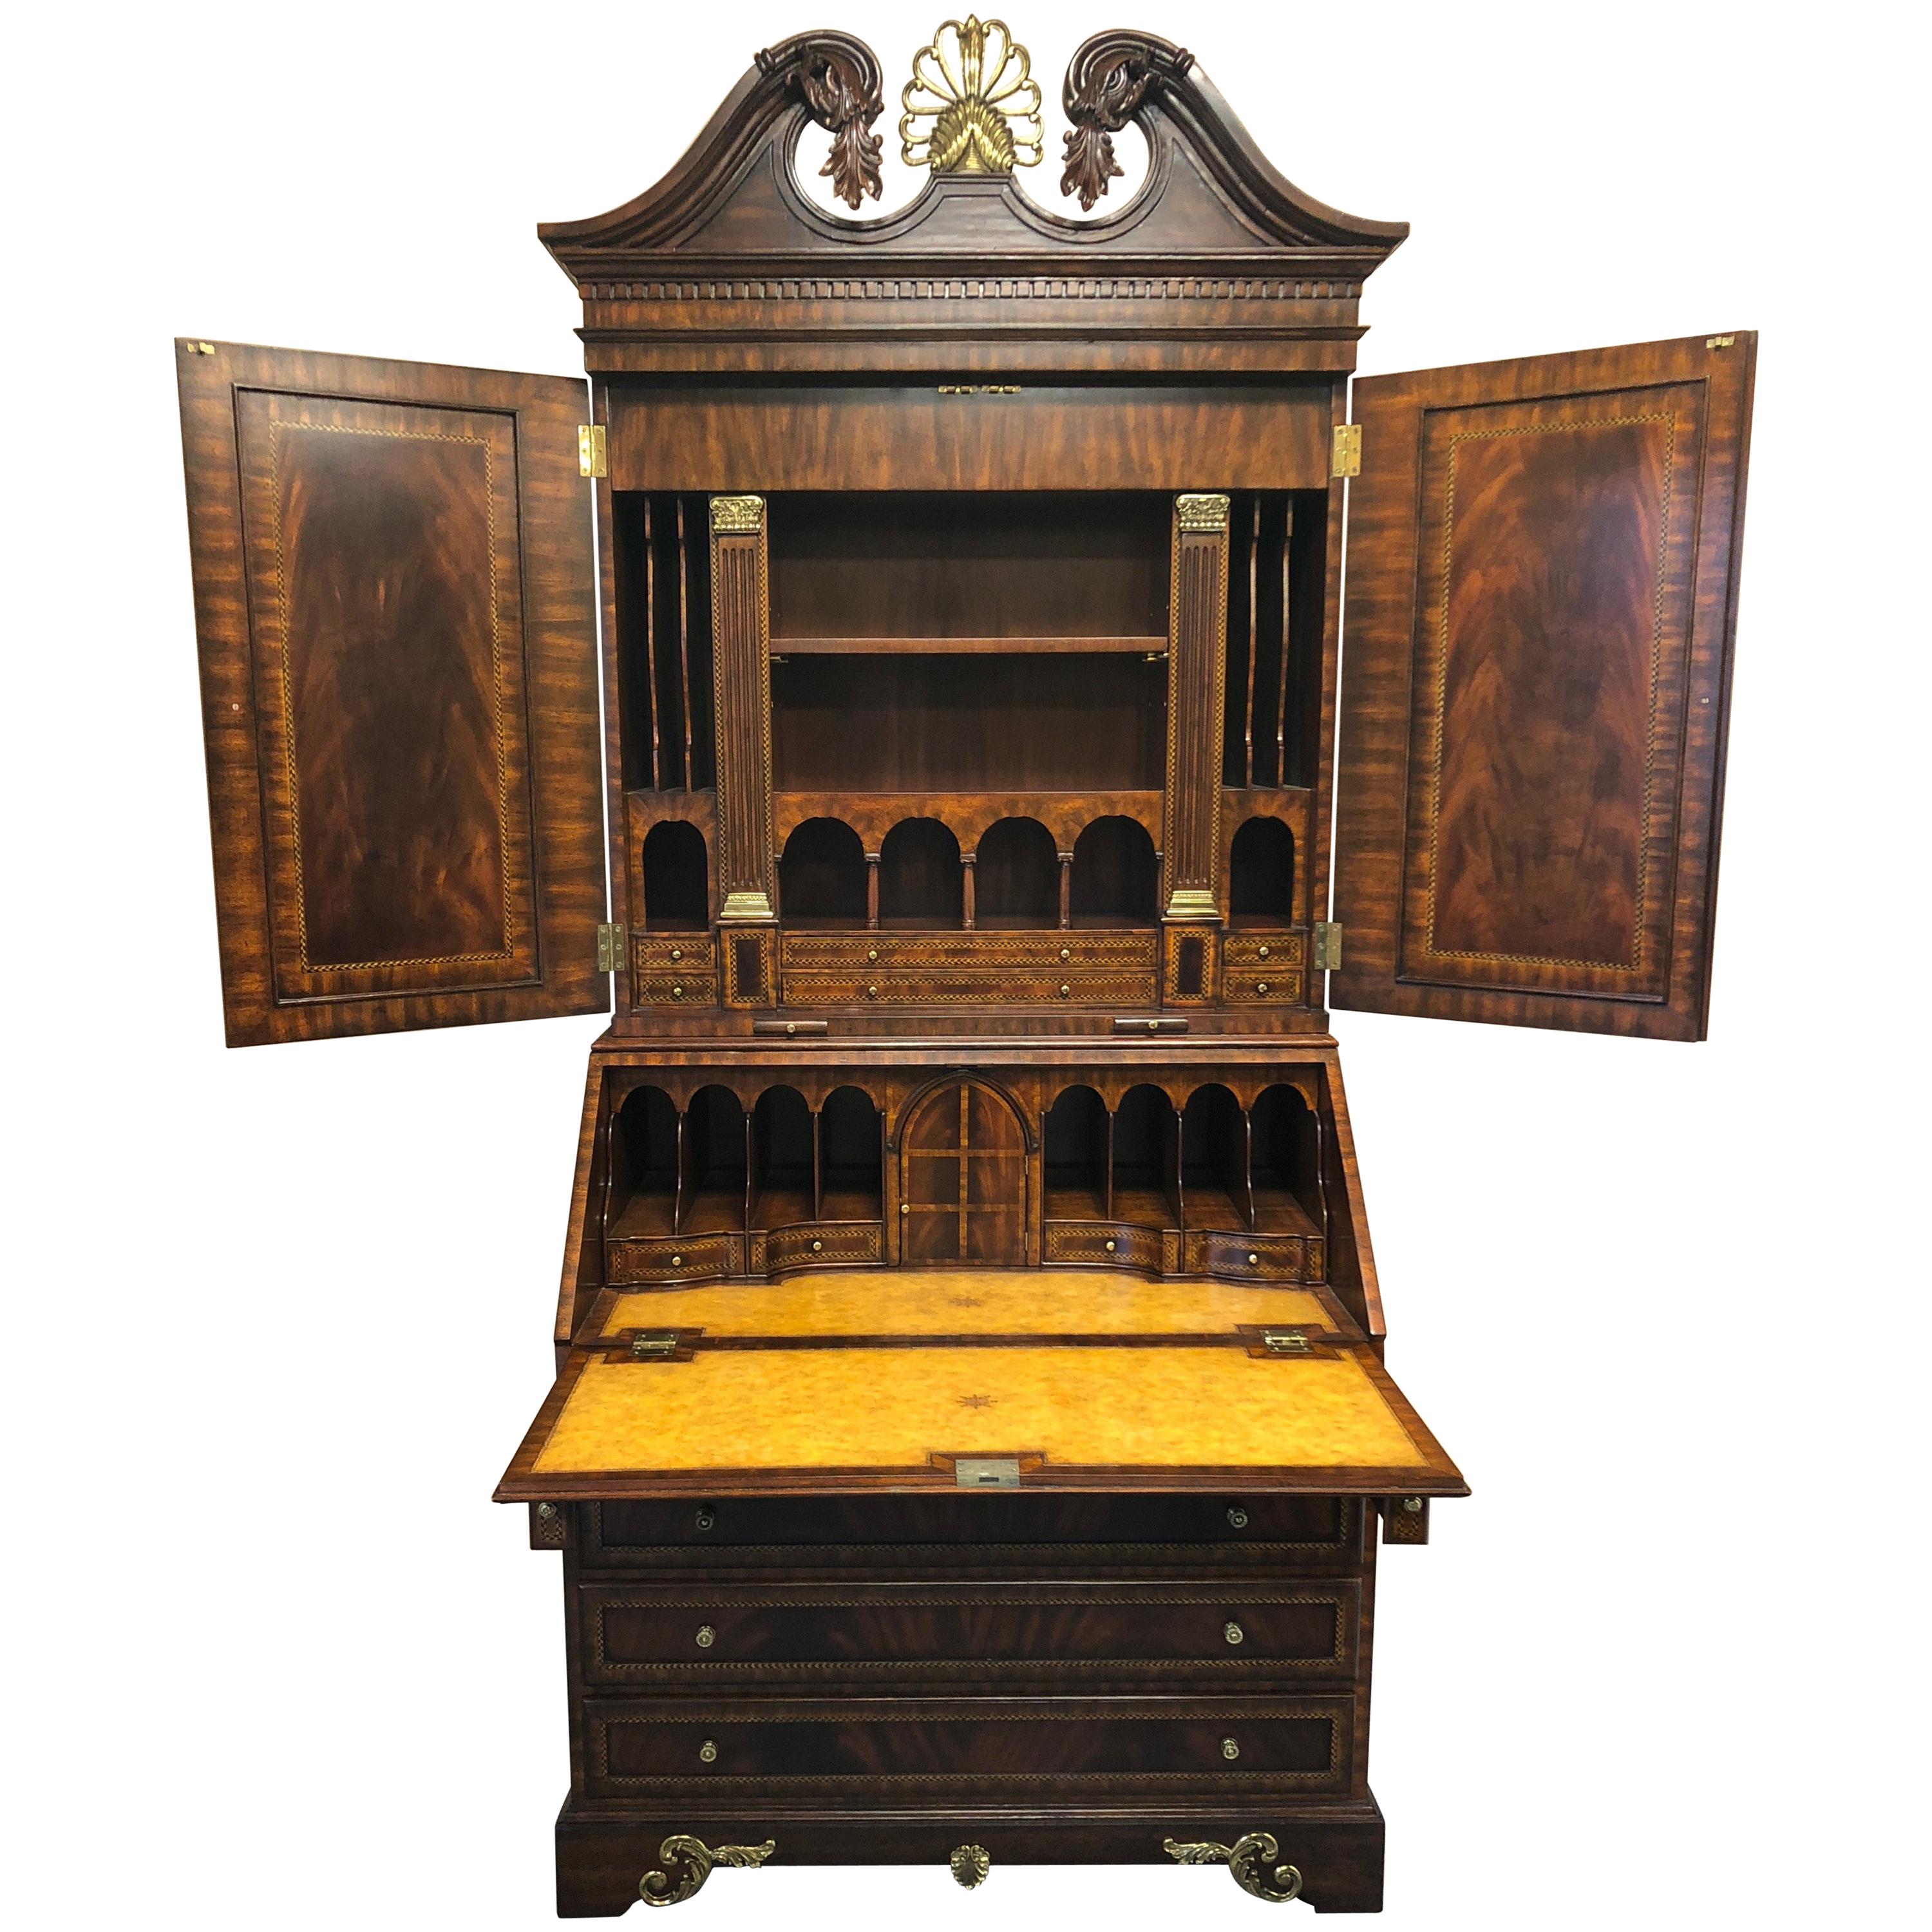 A superior impressively intricate secretary having amazing details such as satinwood and ebony inlay, leather embossed desk surface, a pair of slide out candle holders, gorgeous neoclassical decorations, tons of cubbies and a tudor or gothic style